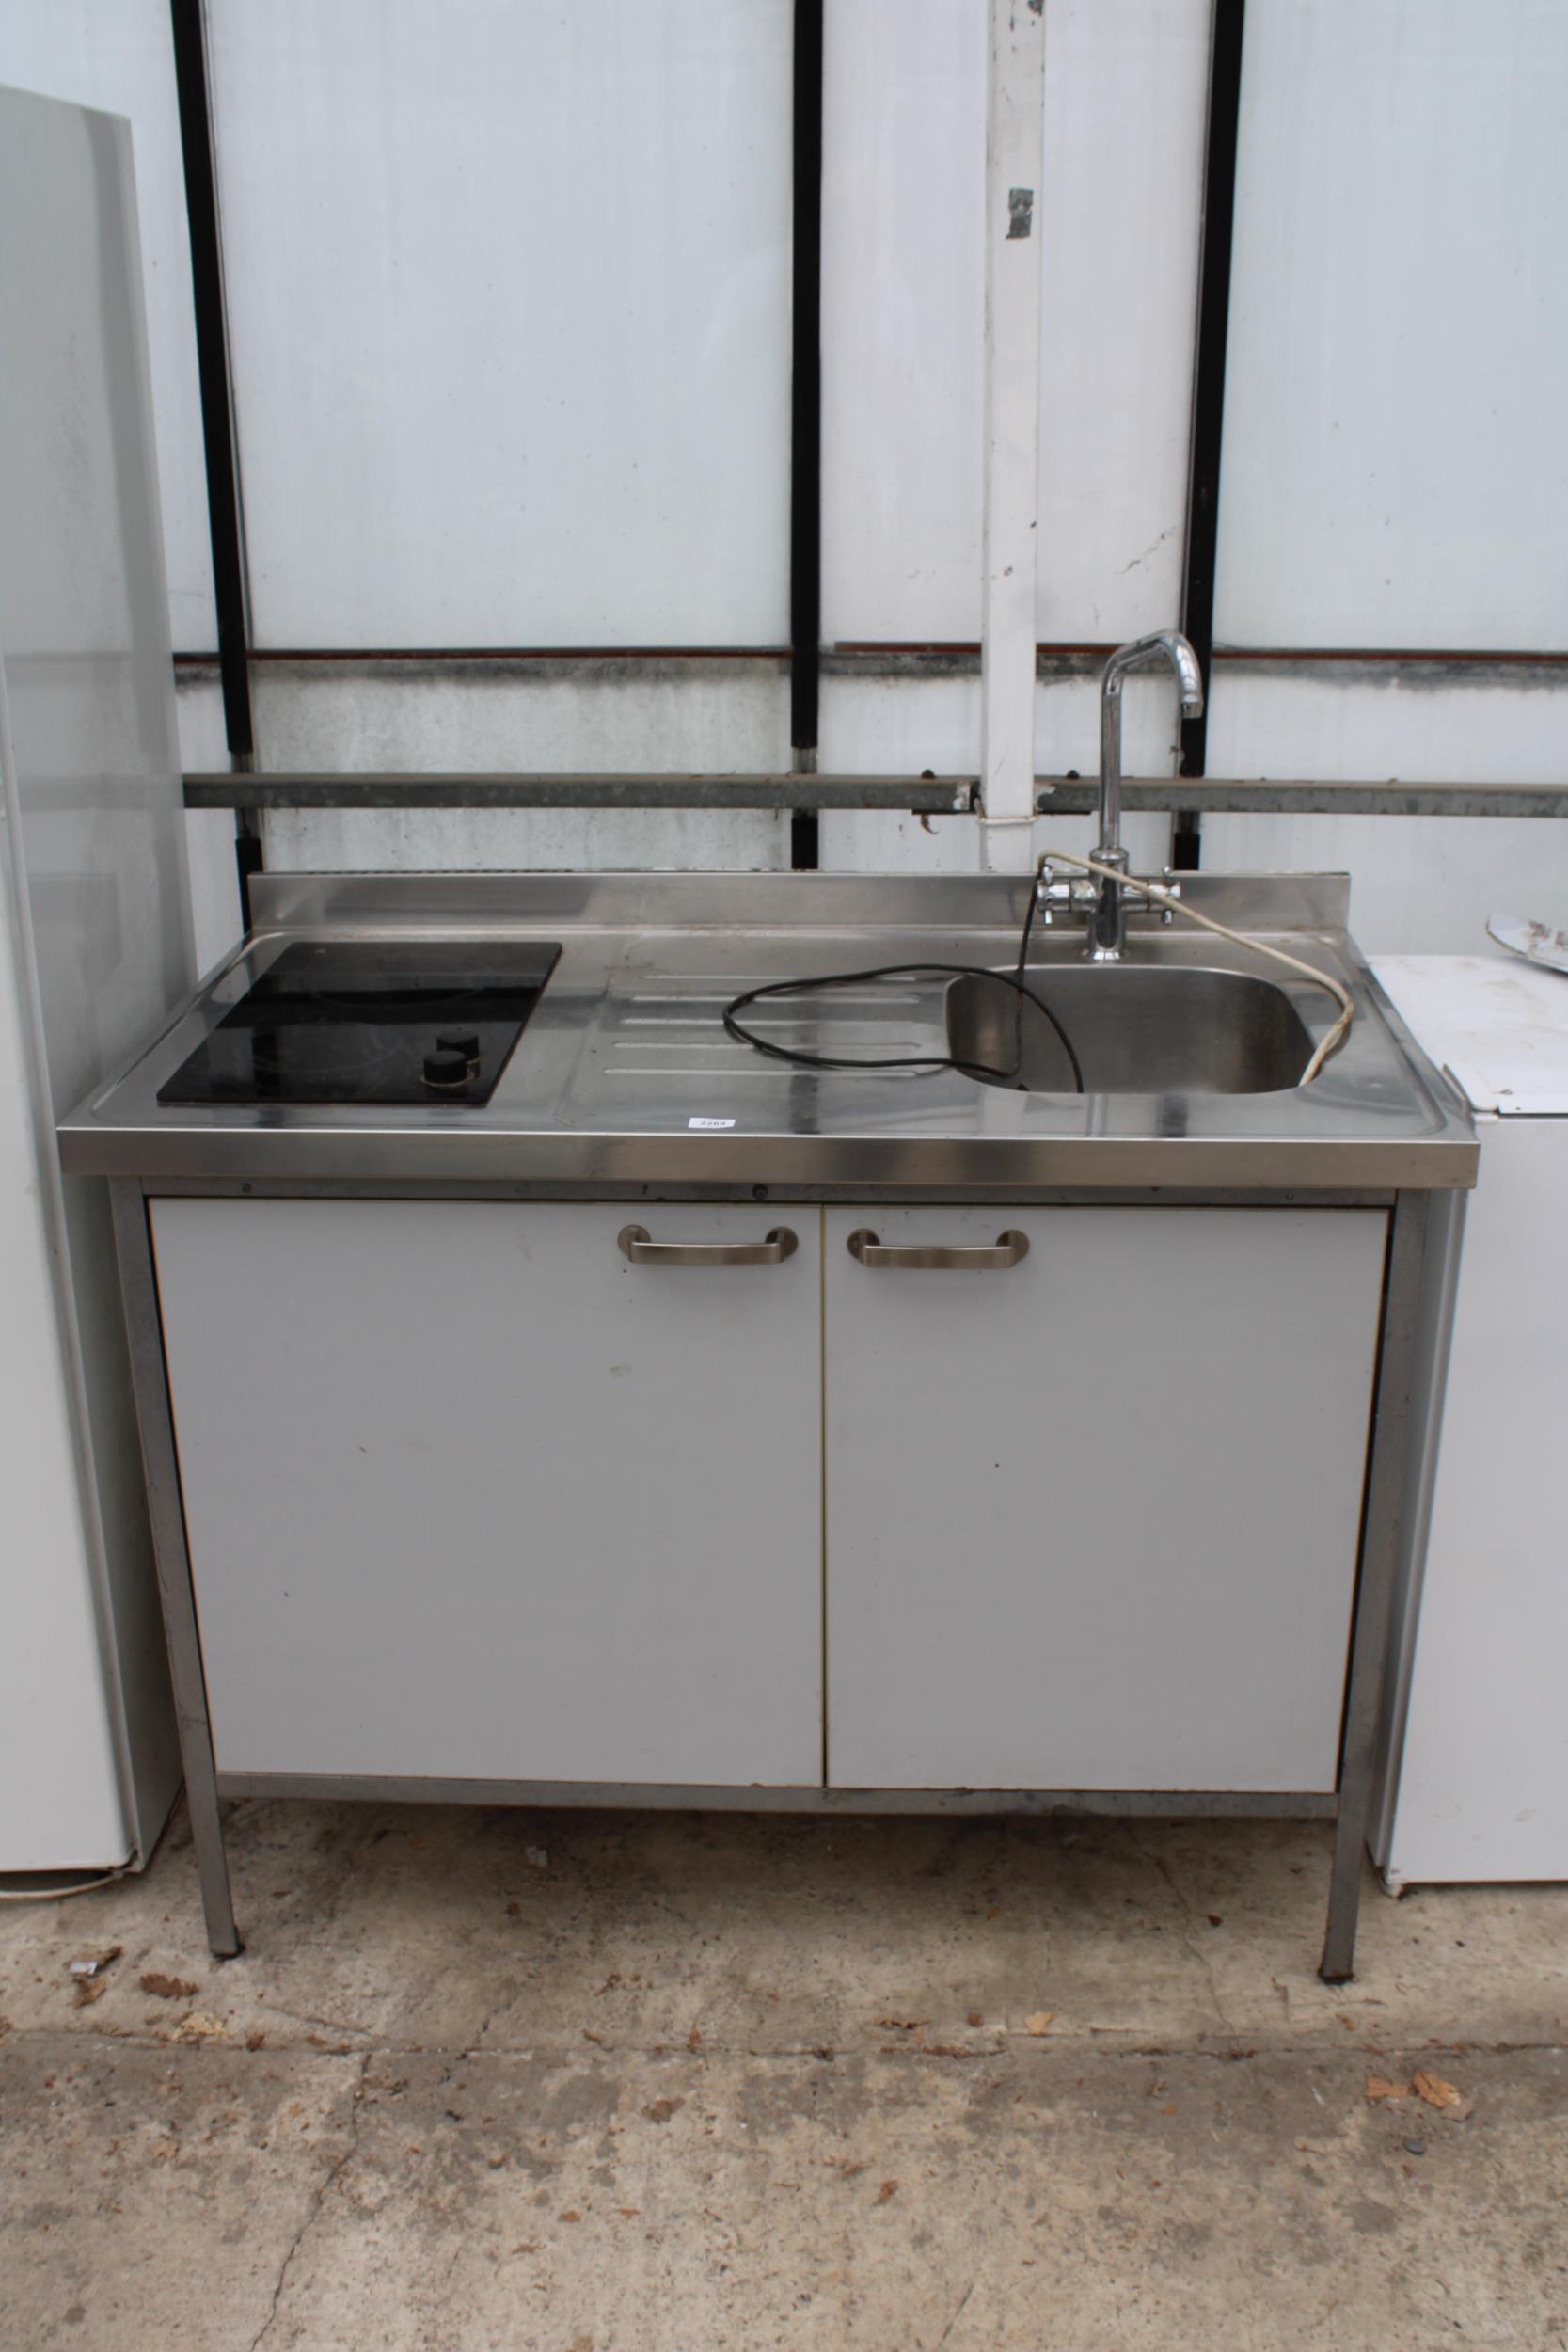 A STAINLESS STEEL SINK UNIT WITH BUILT IN UNDERCOUNTER FRIDGE AND COUNTER TOP HOB